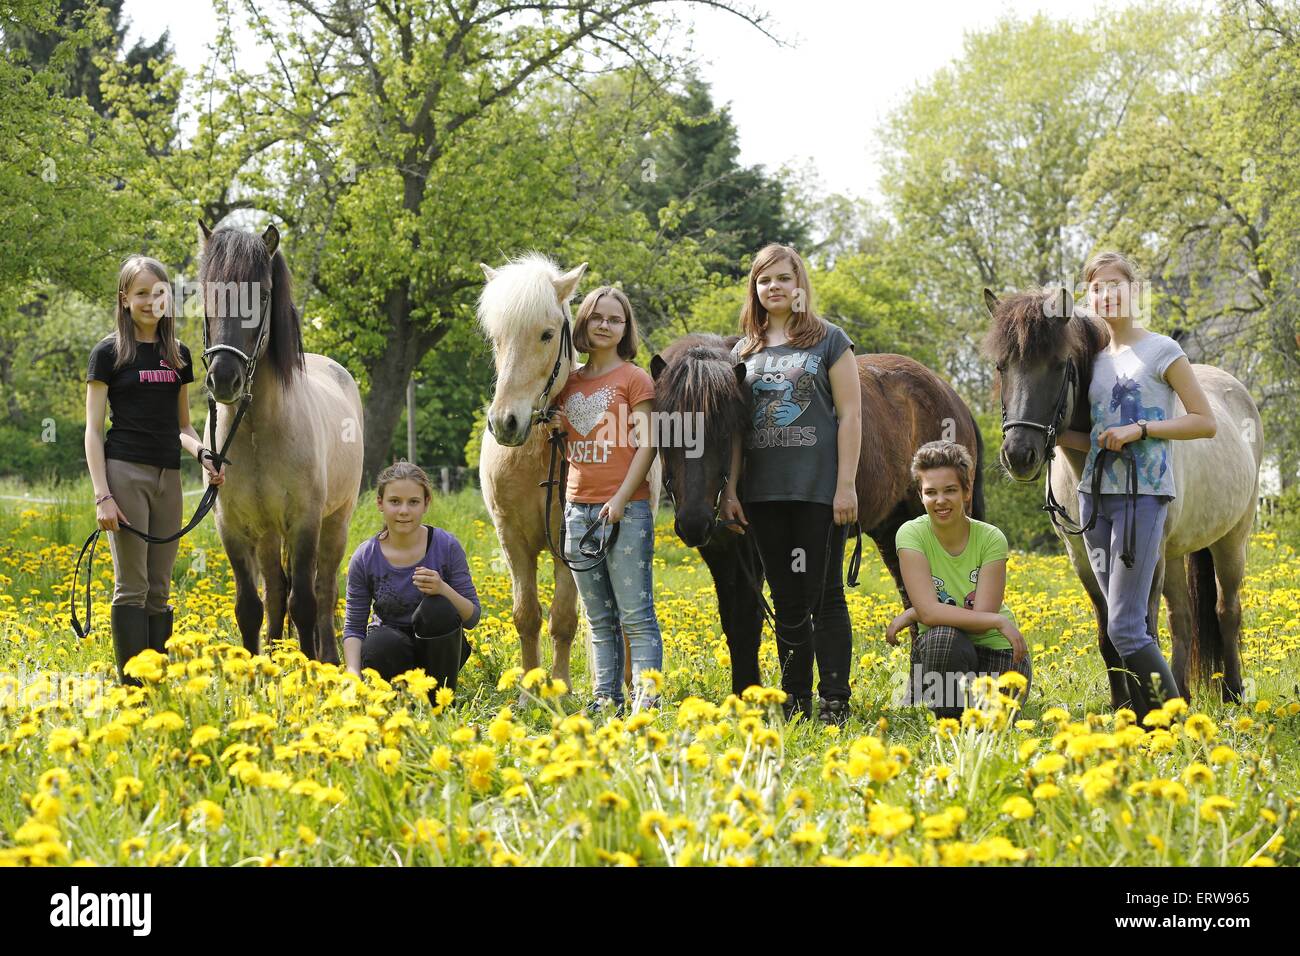 girls with ponies Stock Photo